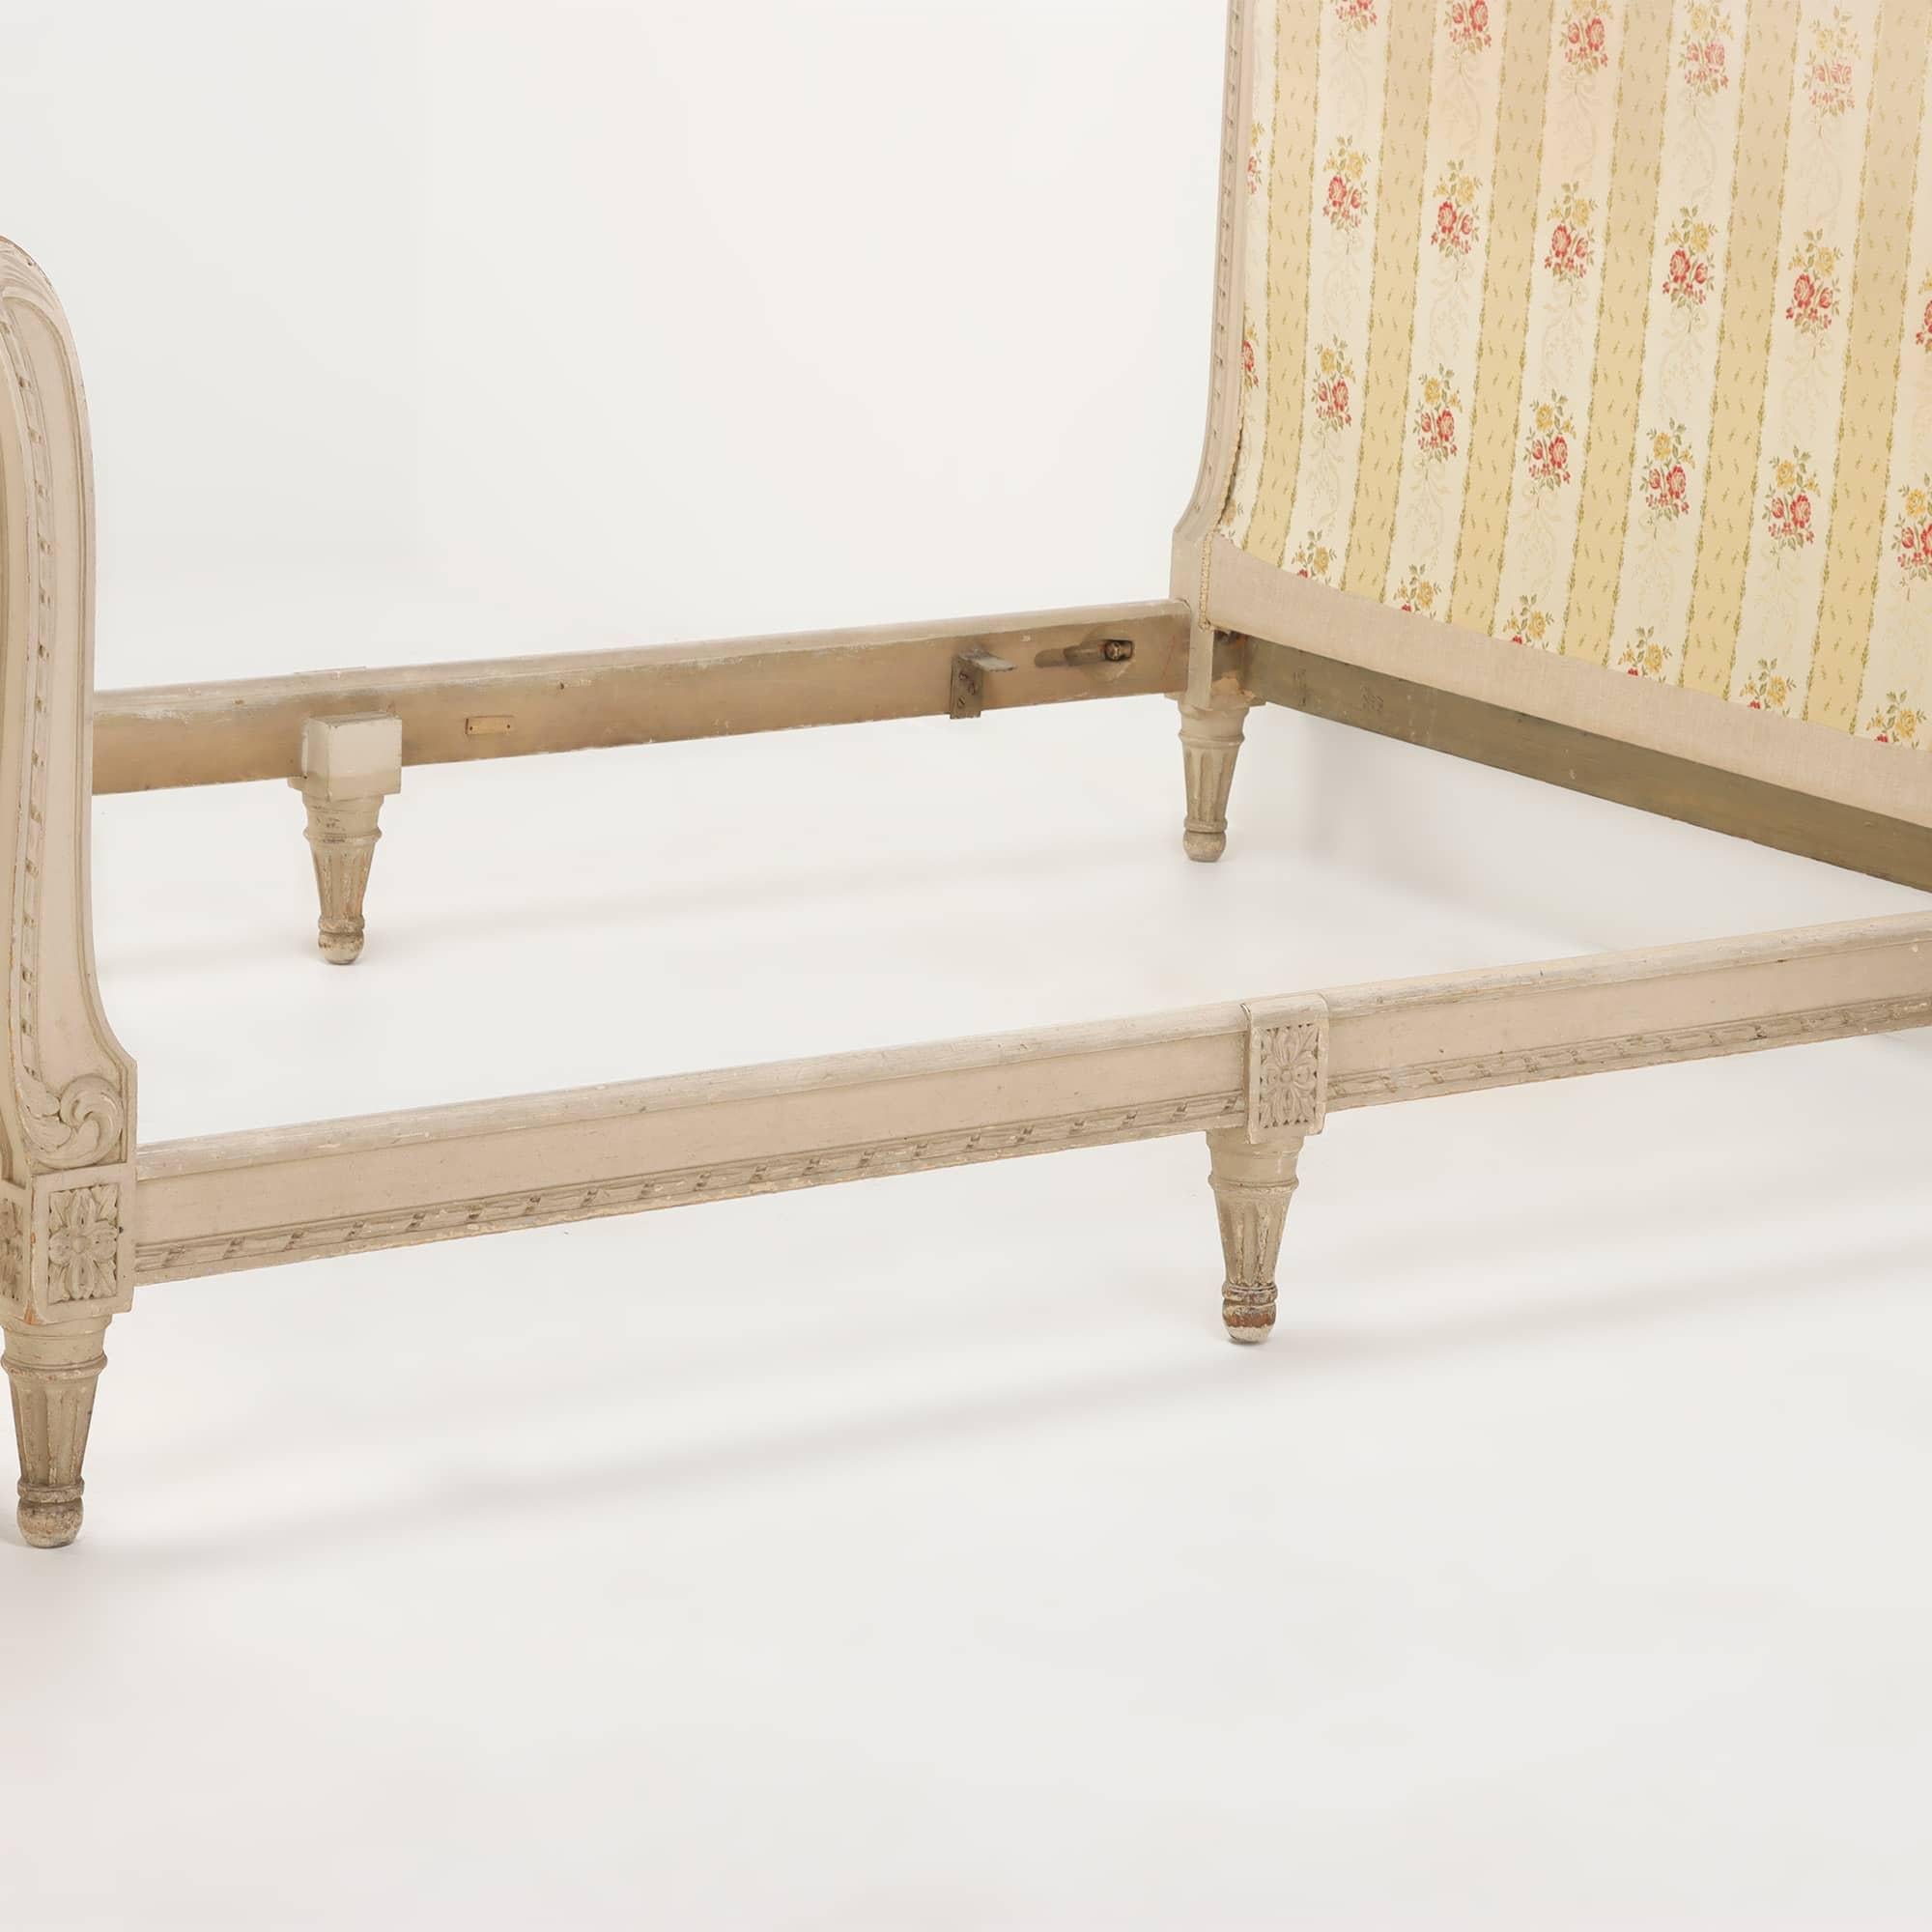 Early 20th Century French Louis XVI style painted bed circa 1920.